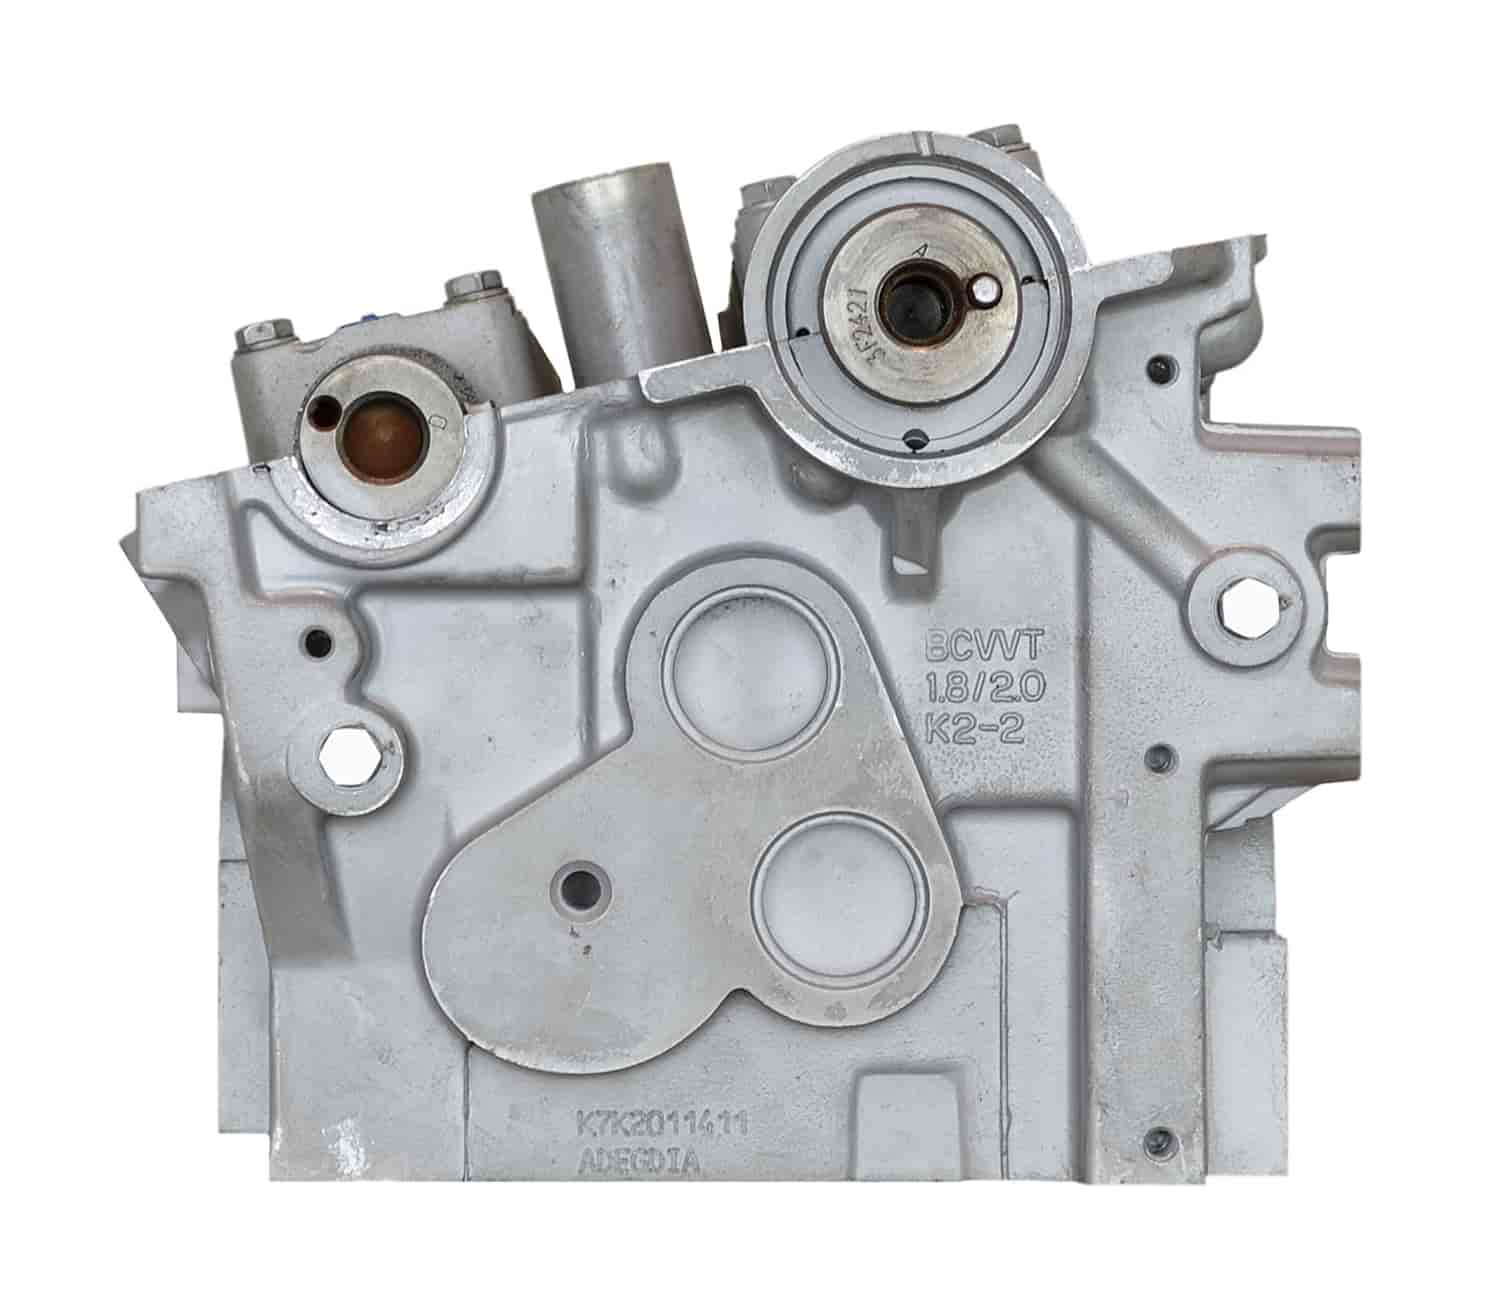 Remanufactured Cylinder Head for 2006-2010 Hyundai with 2.0L L4